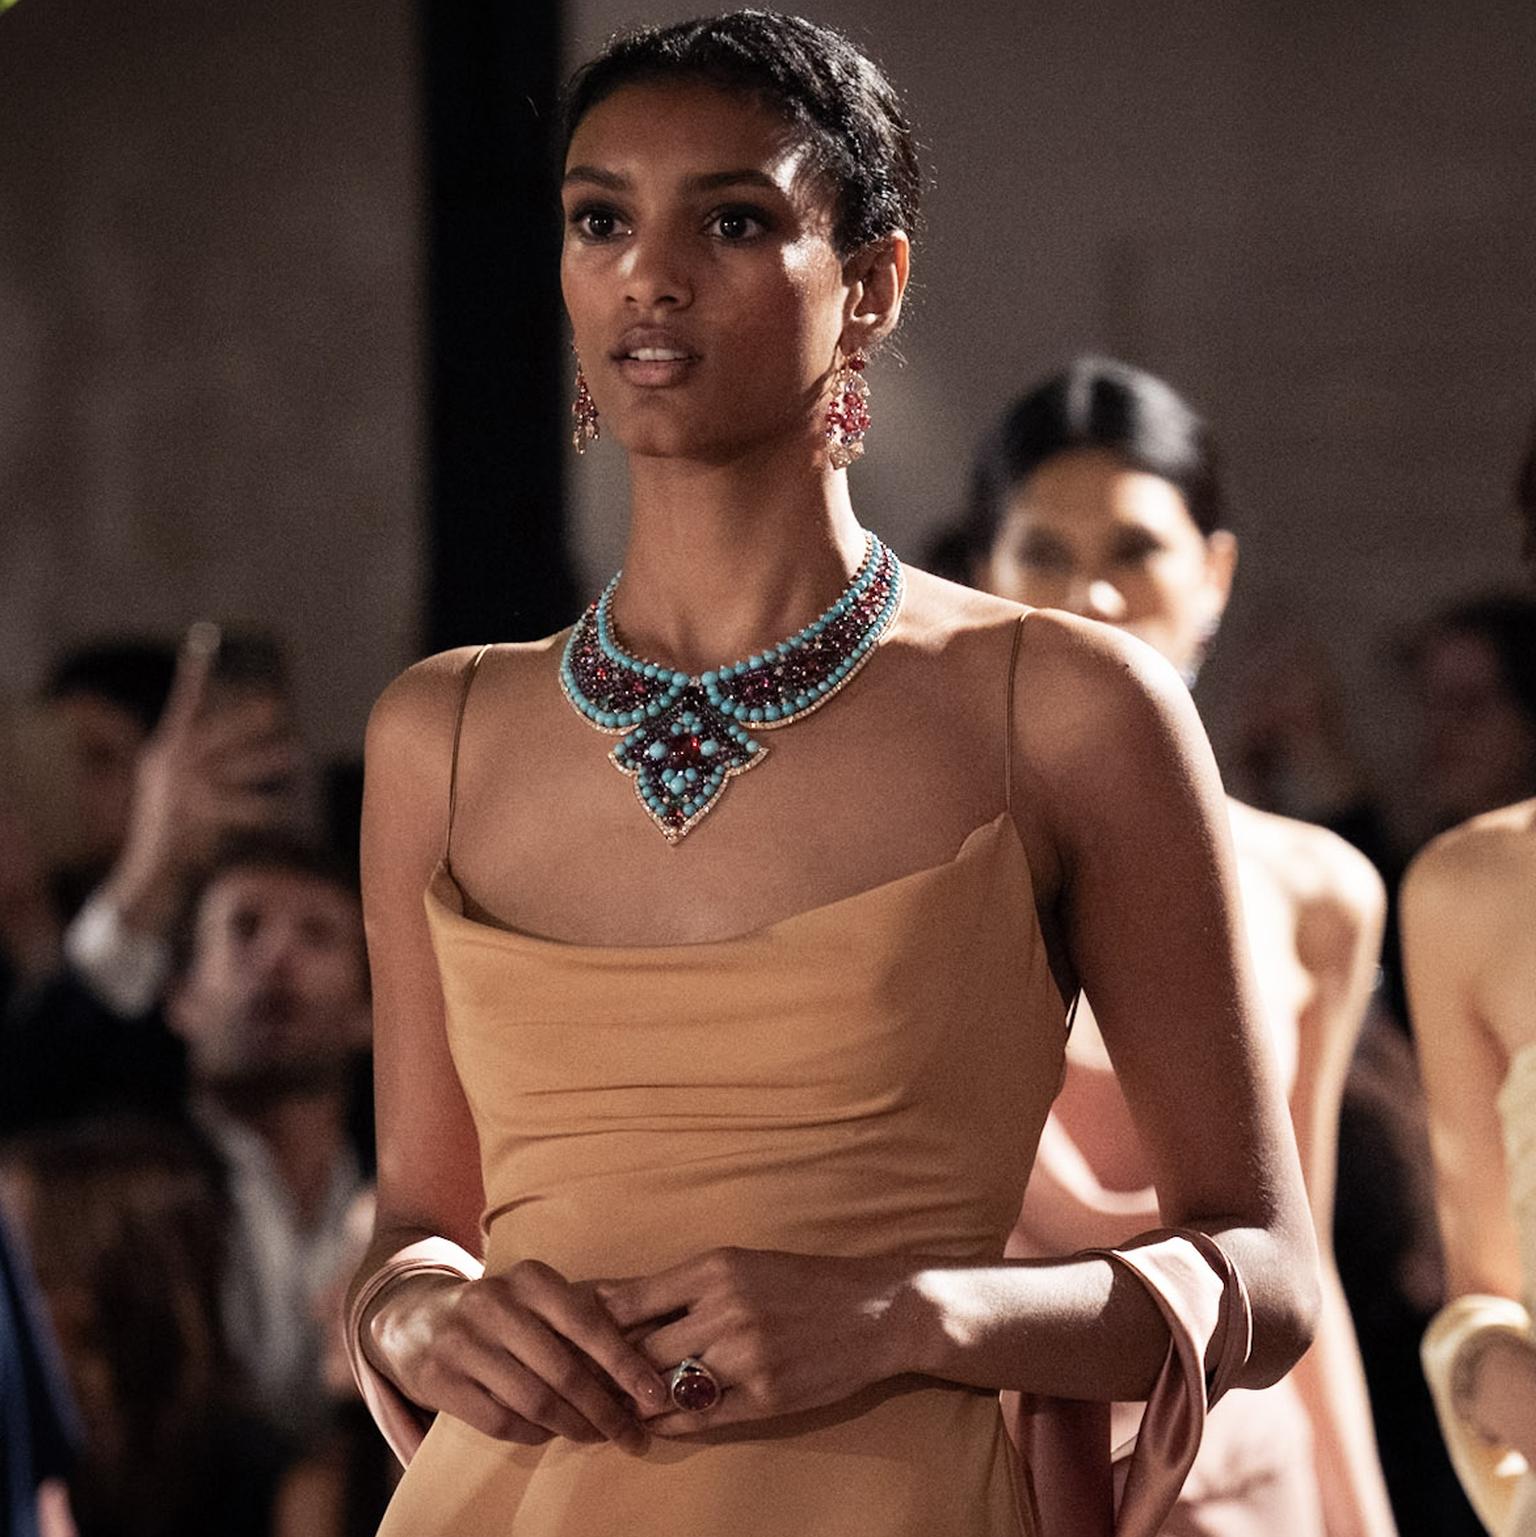 Model wearing the Lotus Cabochon necklace by Bulgari